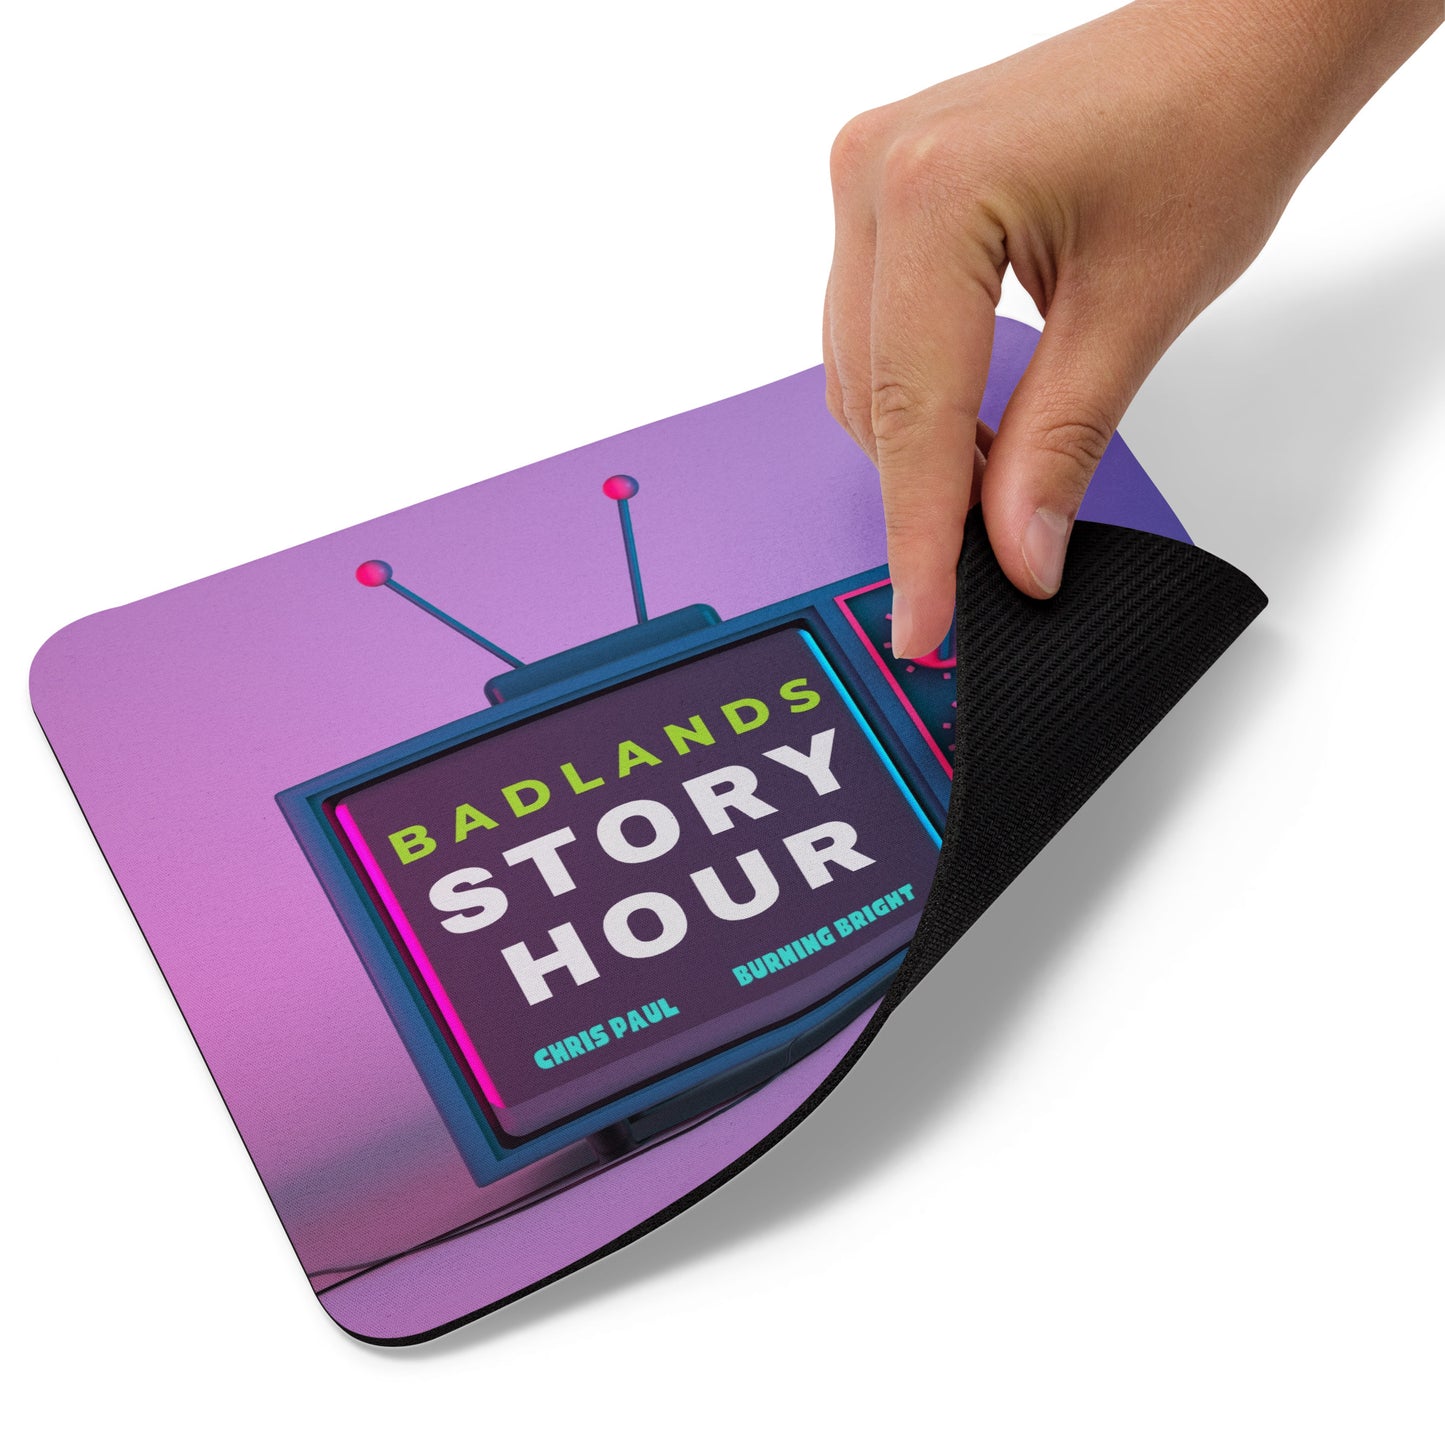 Badlands Story Hour Mouse Pad